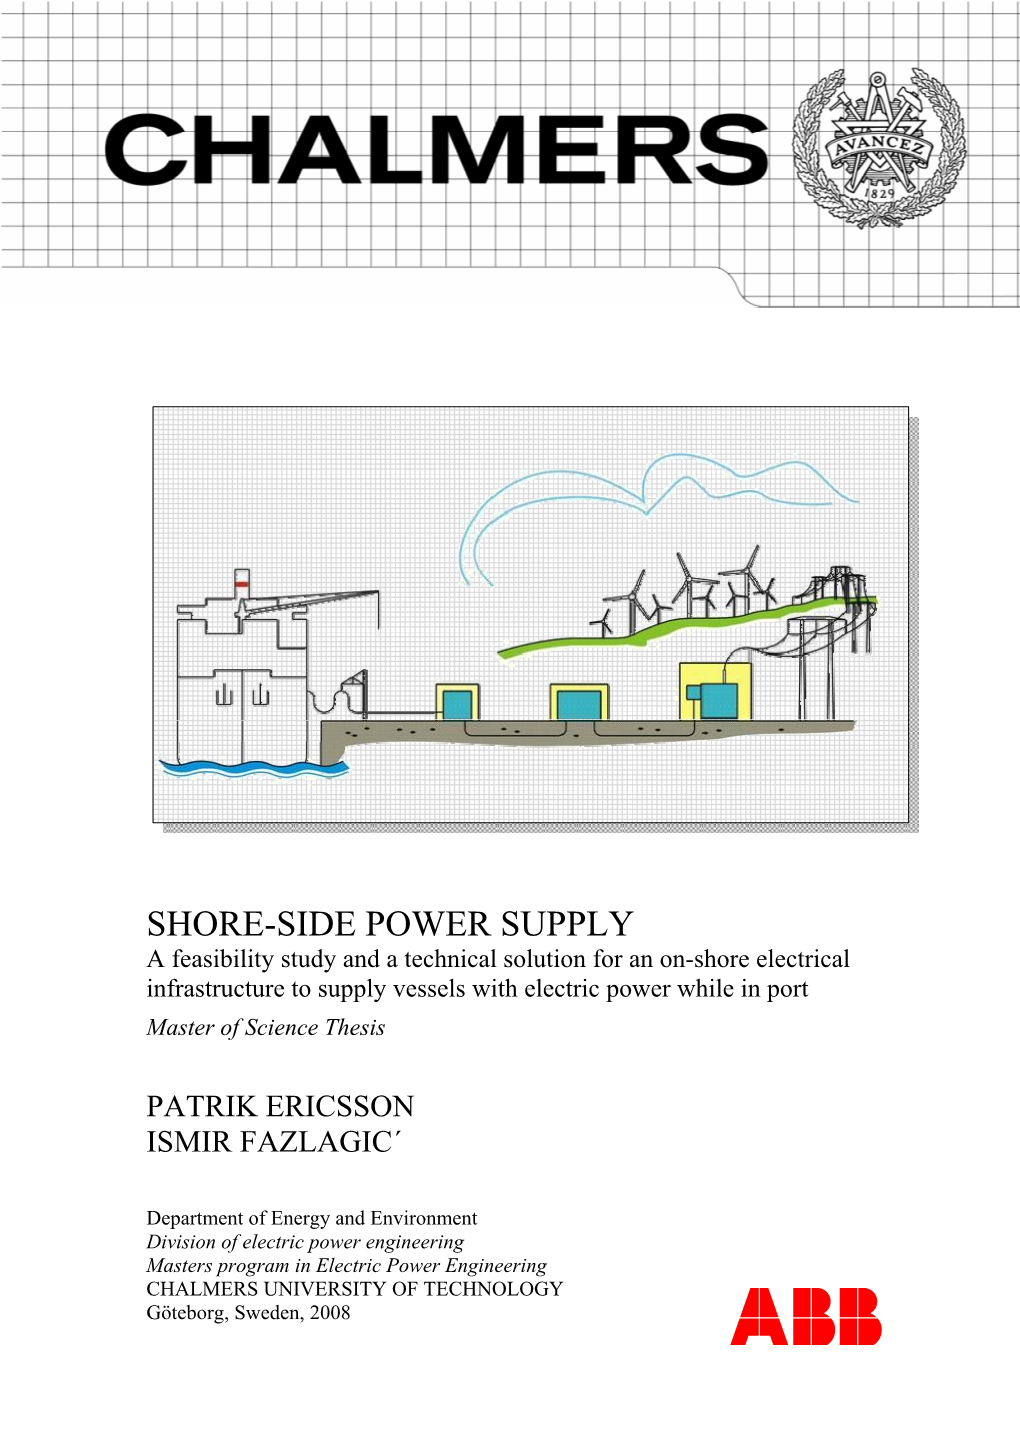 Master Thesis Shore-Side Power Supply